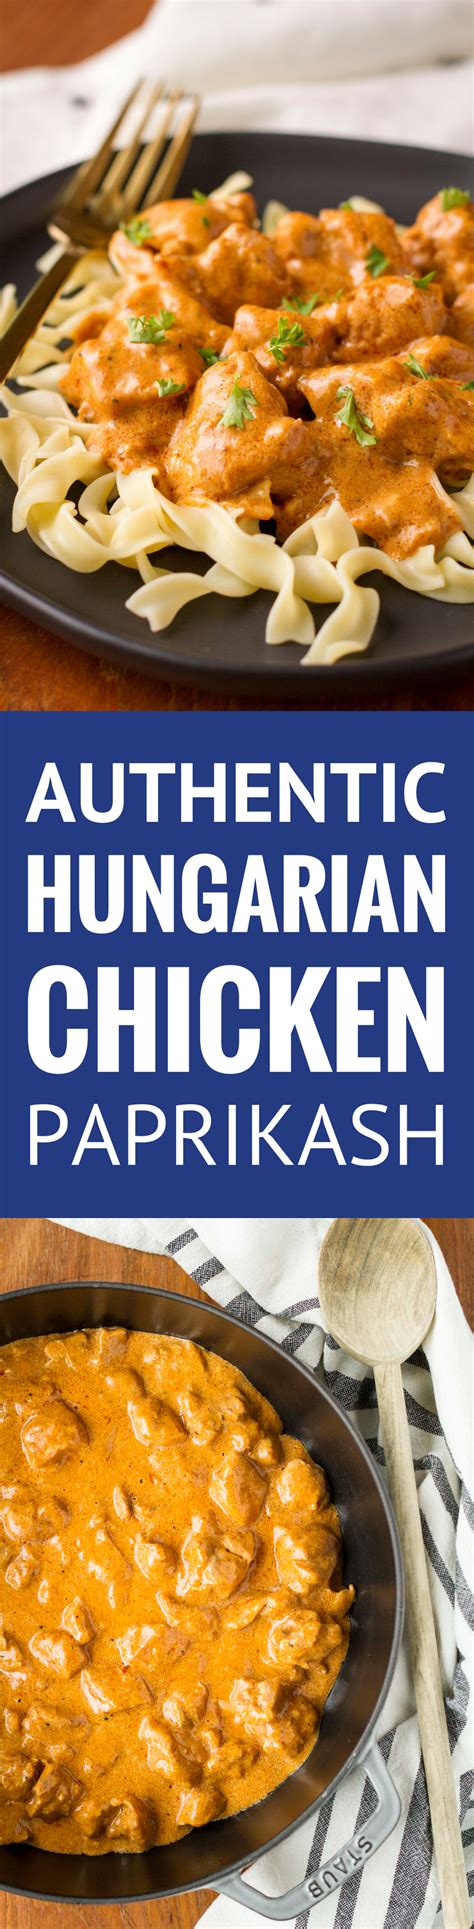 Chicken Paprikash An Authentic Hungarian Chicken Paprikash Using Traditional Hungarian Sweet